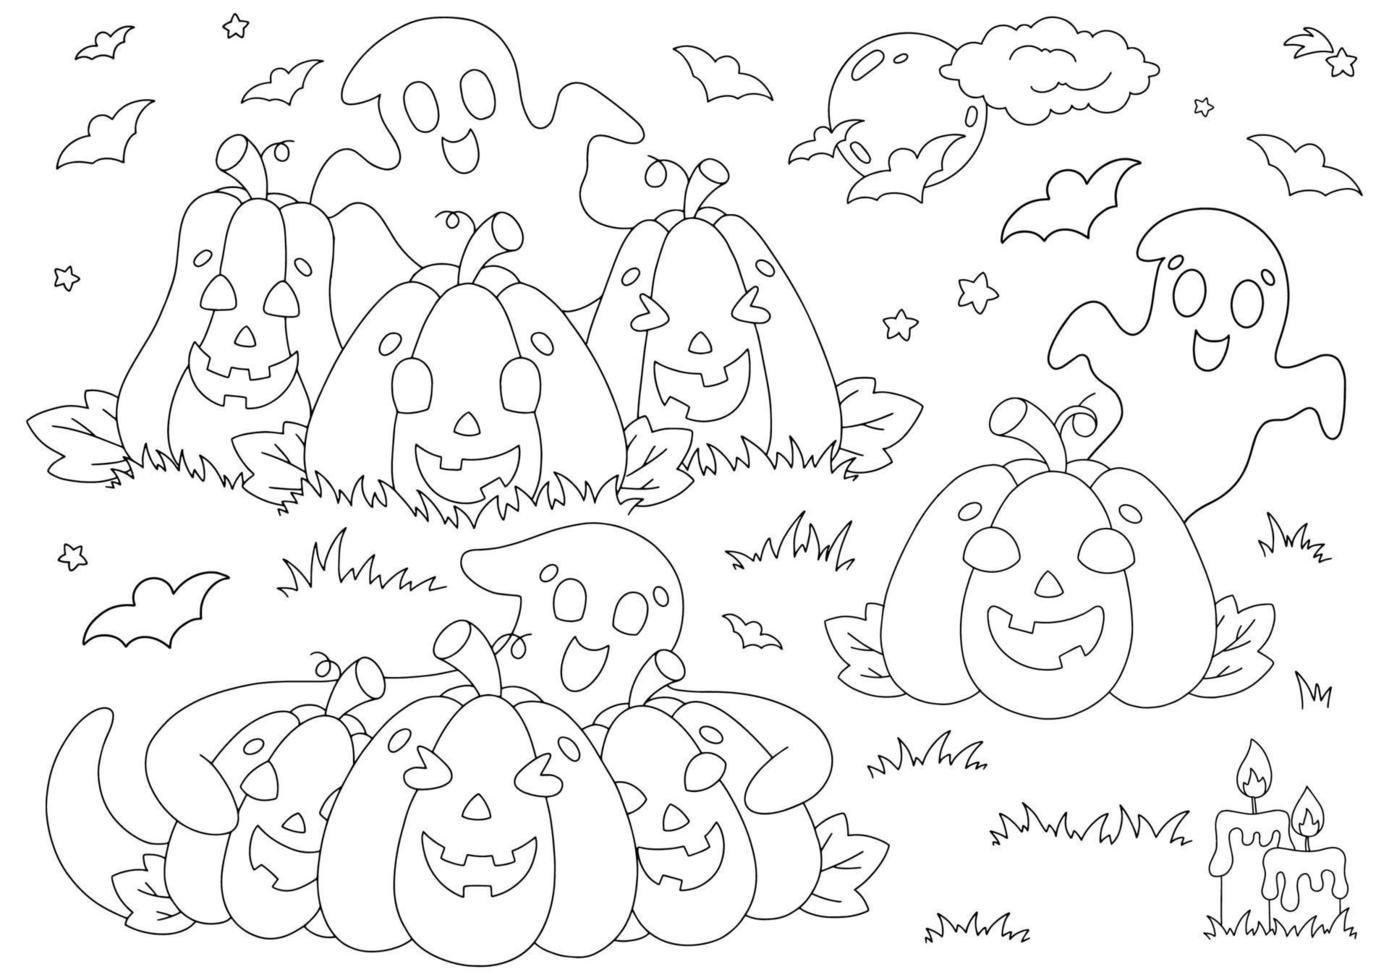 Set of elements for Halloween pumpkins, ghosts, bats. Coloring book page for kids. Cartoon style character. Vector illustration isolated on white background.